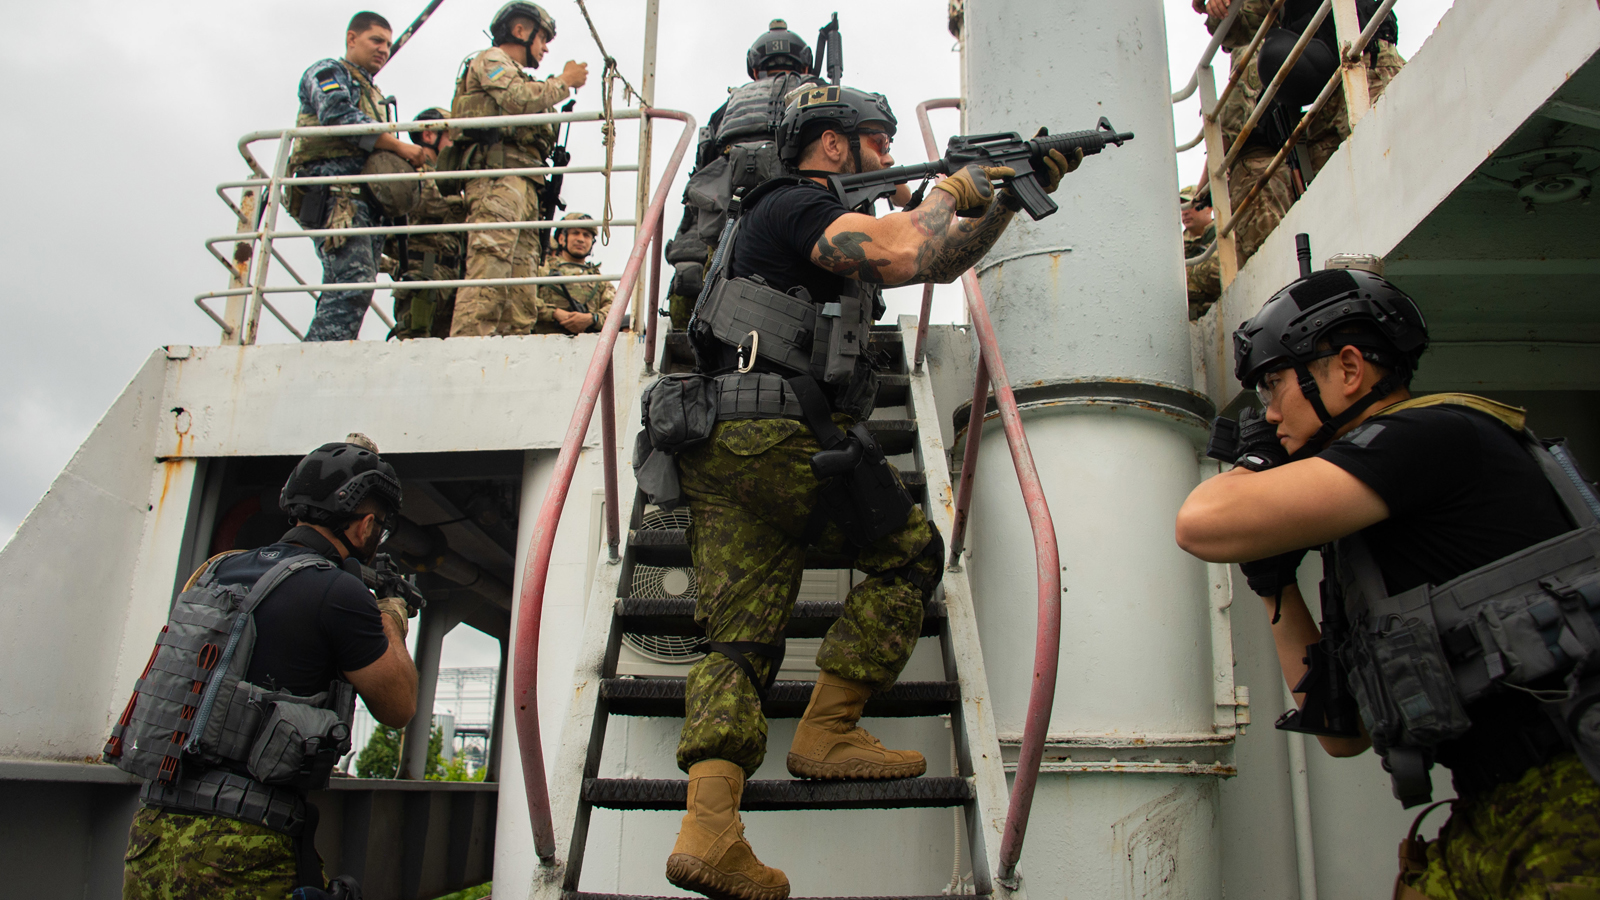 Members of the Naval Tactical Operations Group demonstrate ship drills to multinational partners during Exercise Sea Breeze 21 in Ukraine on July 5.